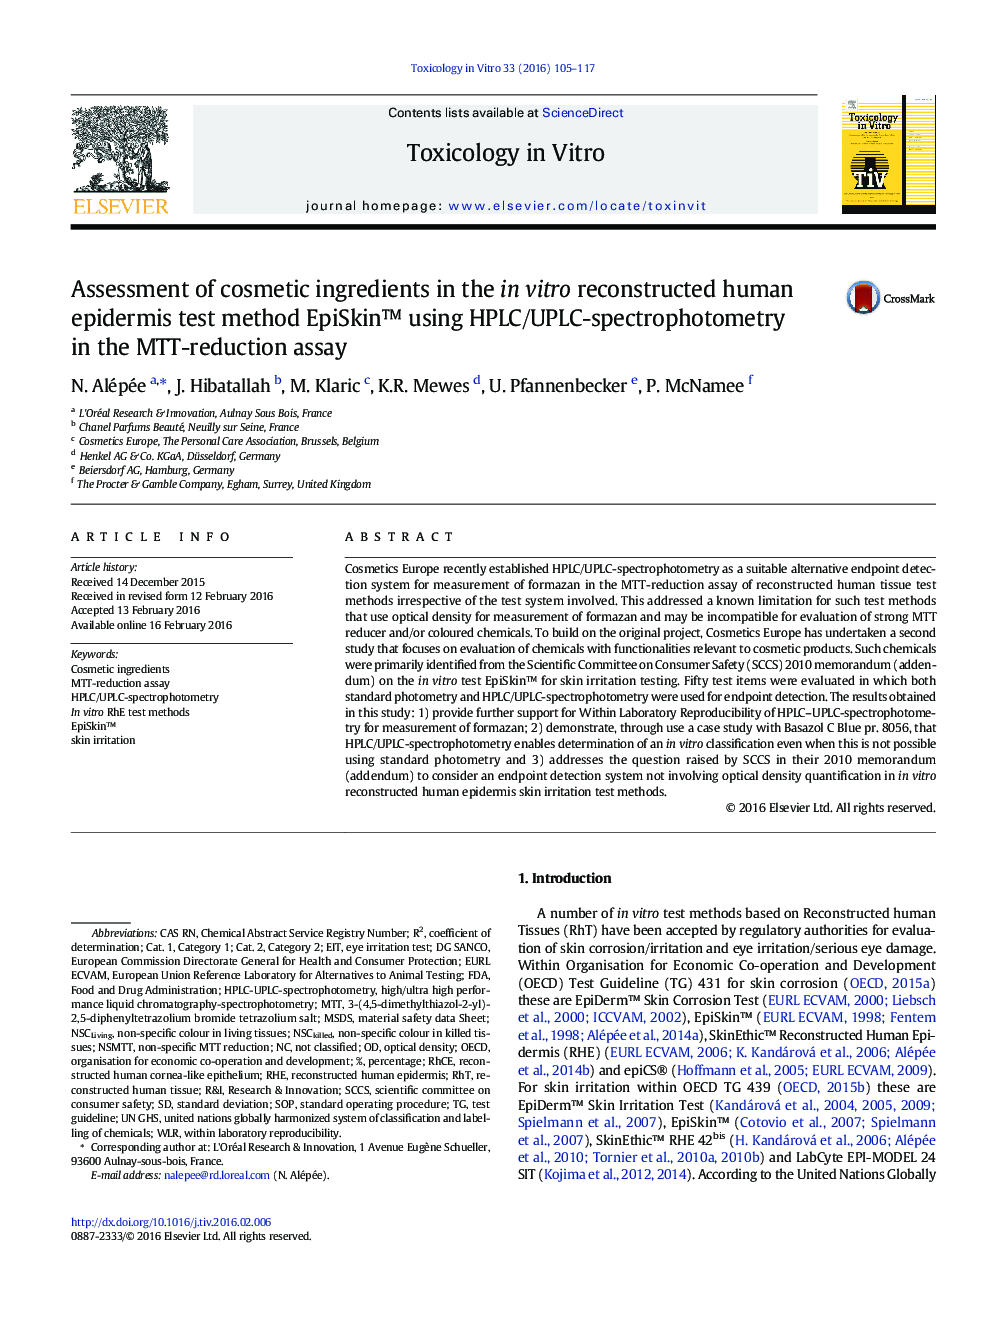 Assessment of cosmetic ingredients in the in vitro reconstructed human epidermis test method EpiSkinâ¢ using HPLC/UPLC-spectrophotometry in the MTT-reduction assay